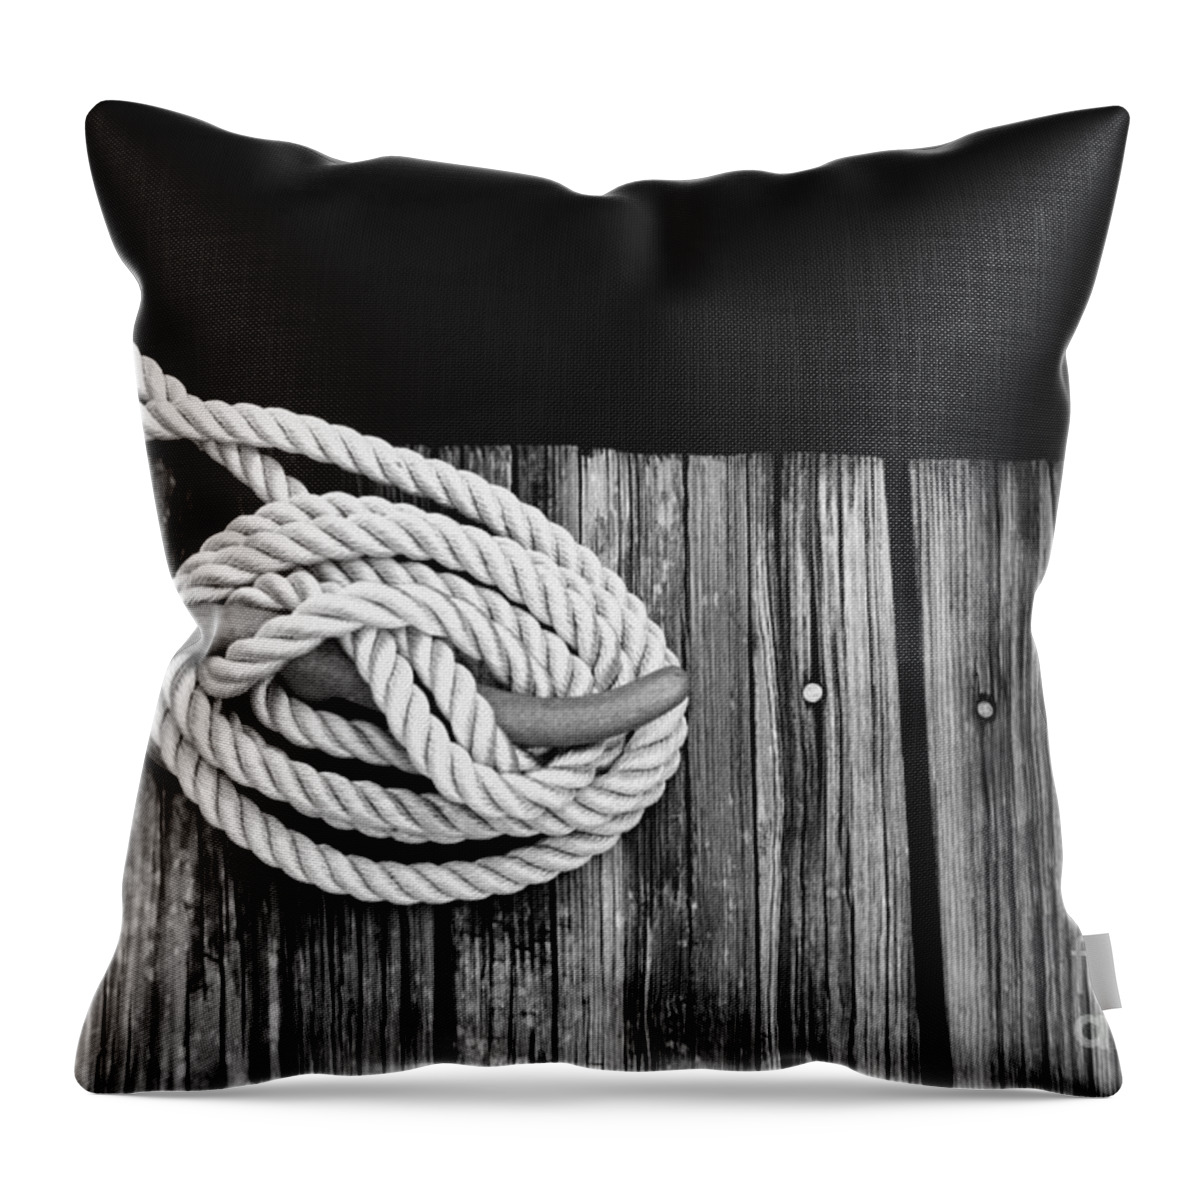 Dock Throw Pillow featuring the photograph All Secured by Jayne Carney